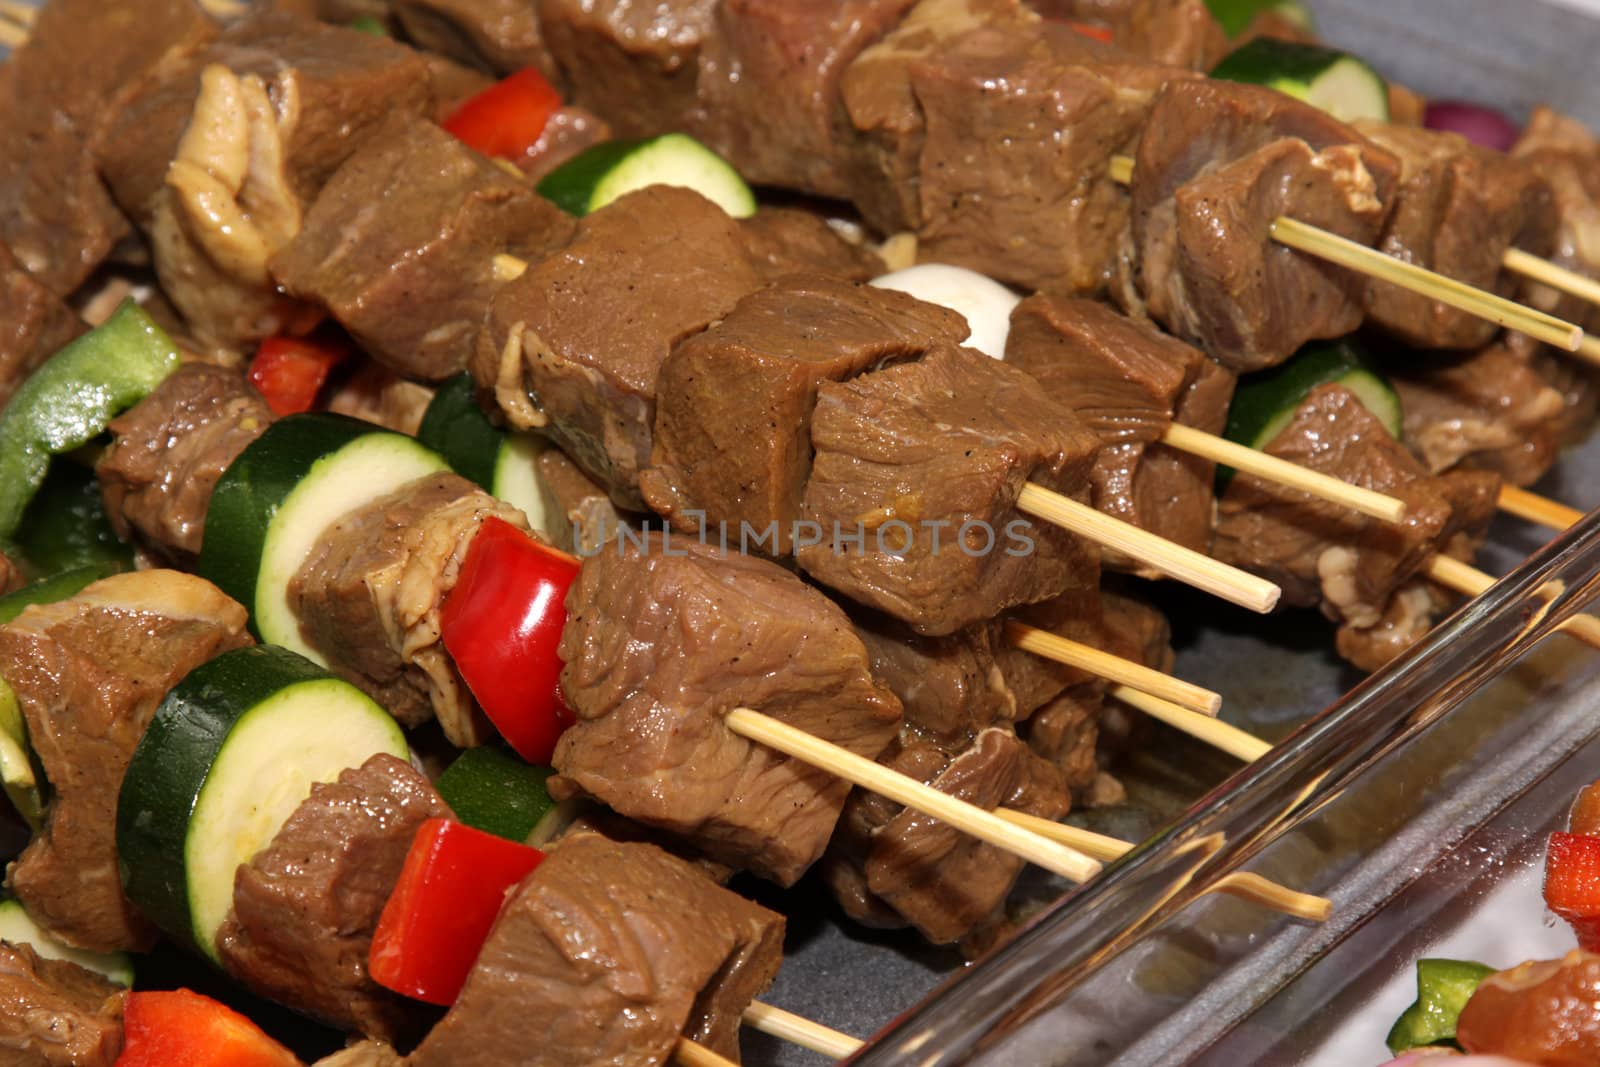 Beef kebabs sitting ready to go on the barbeque.
